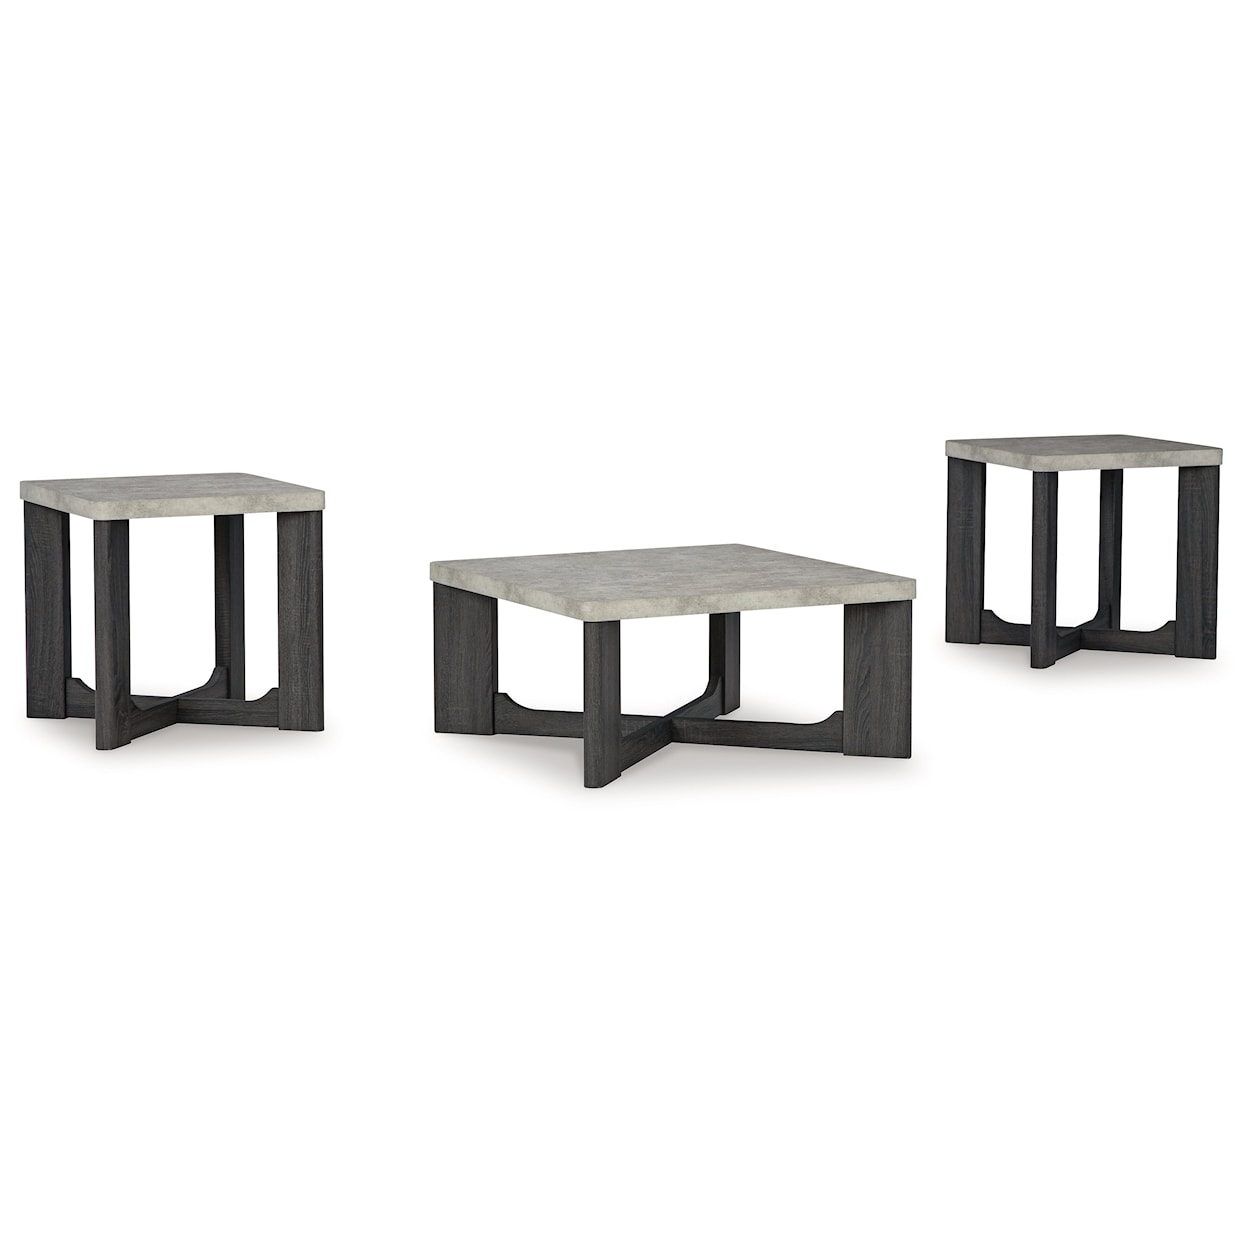 Benchcraft Sharstorm Occasional Table Set